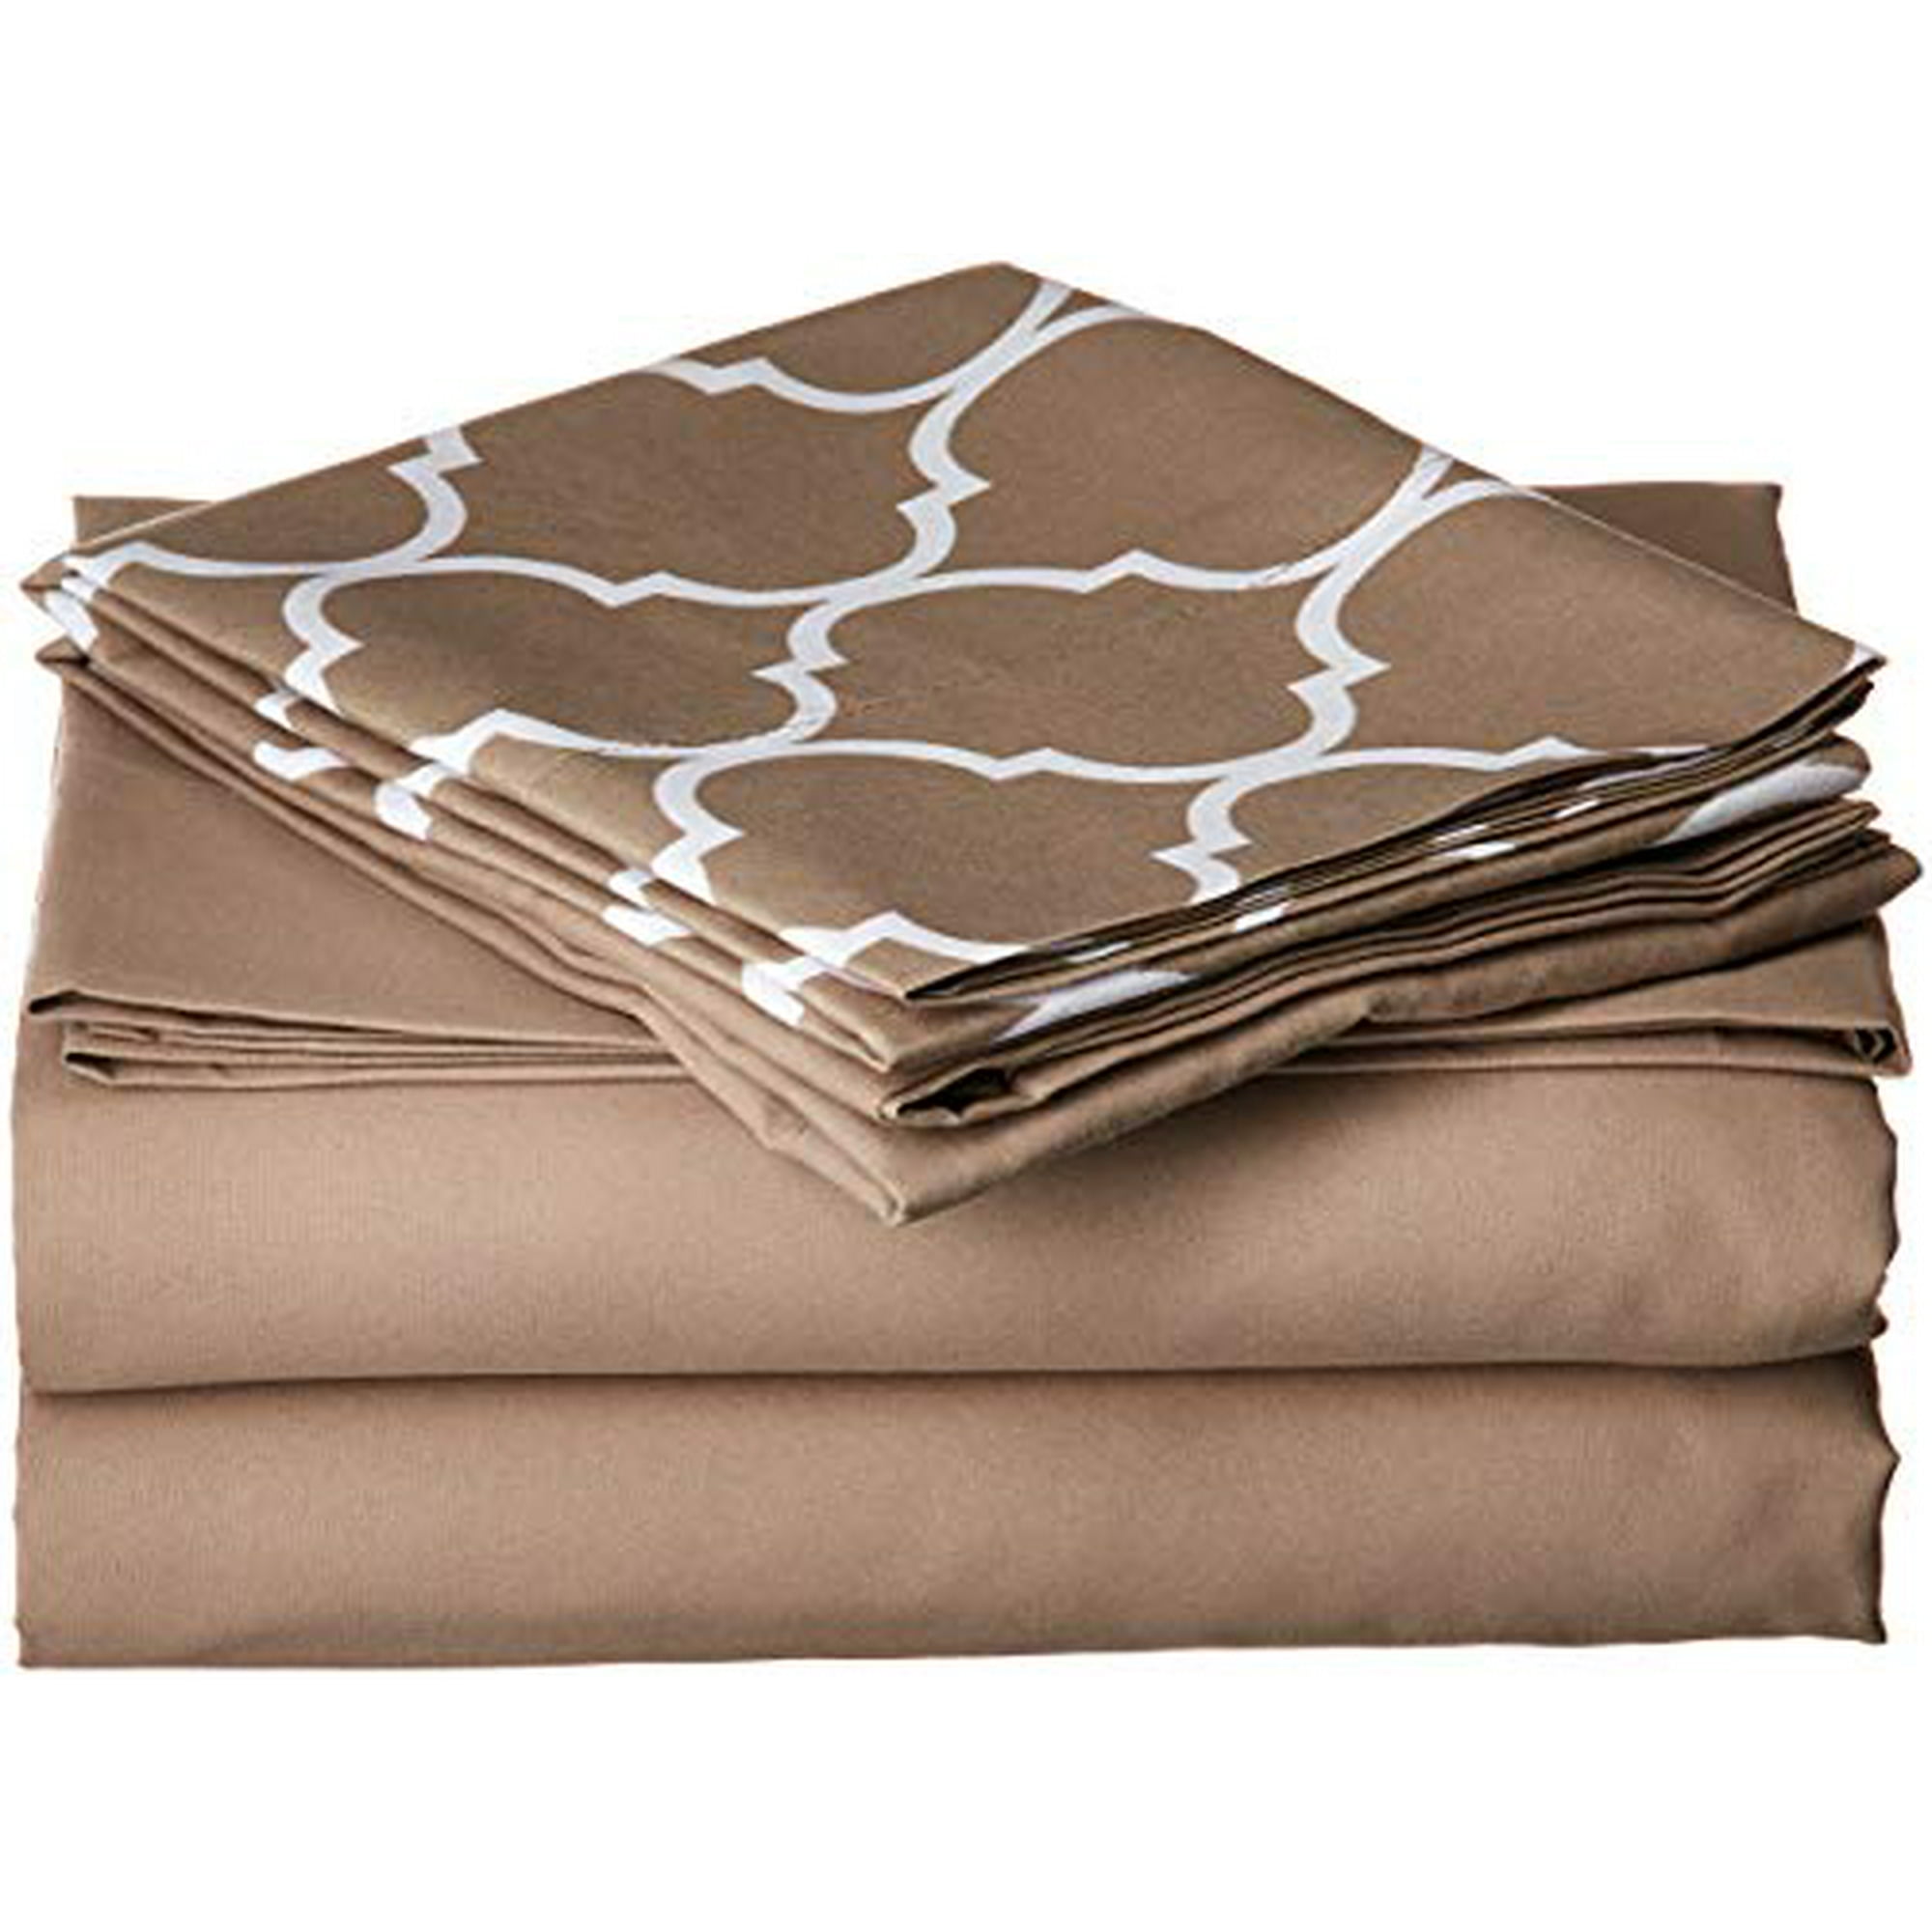 Chic Home Illusion 4 Piece Sheet Set Super Soft Contemporary Geometric Pattern Print Deep Pocket Design Twin Taupe Illusion 4 Piece Set Super Soft Contemporary Geometric Pattern Print Deep Pocket Desig Includes Flat & Fitted Sheets and Bonus Pillowcases 